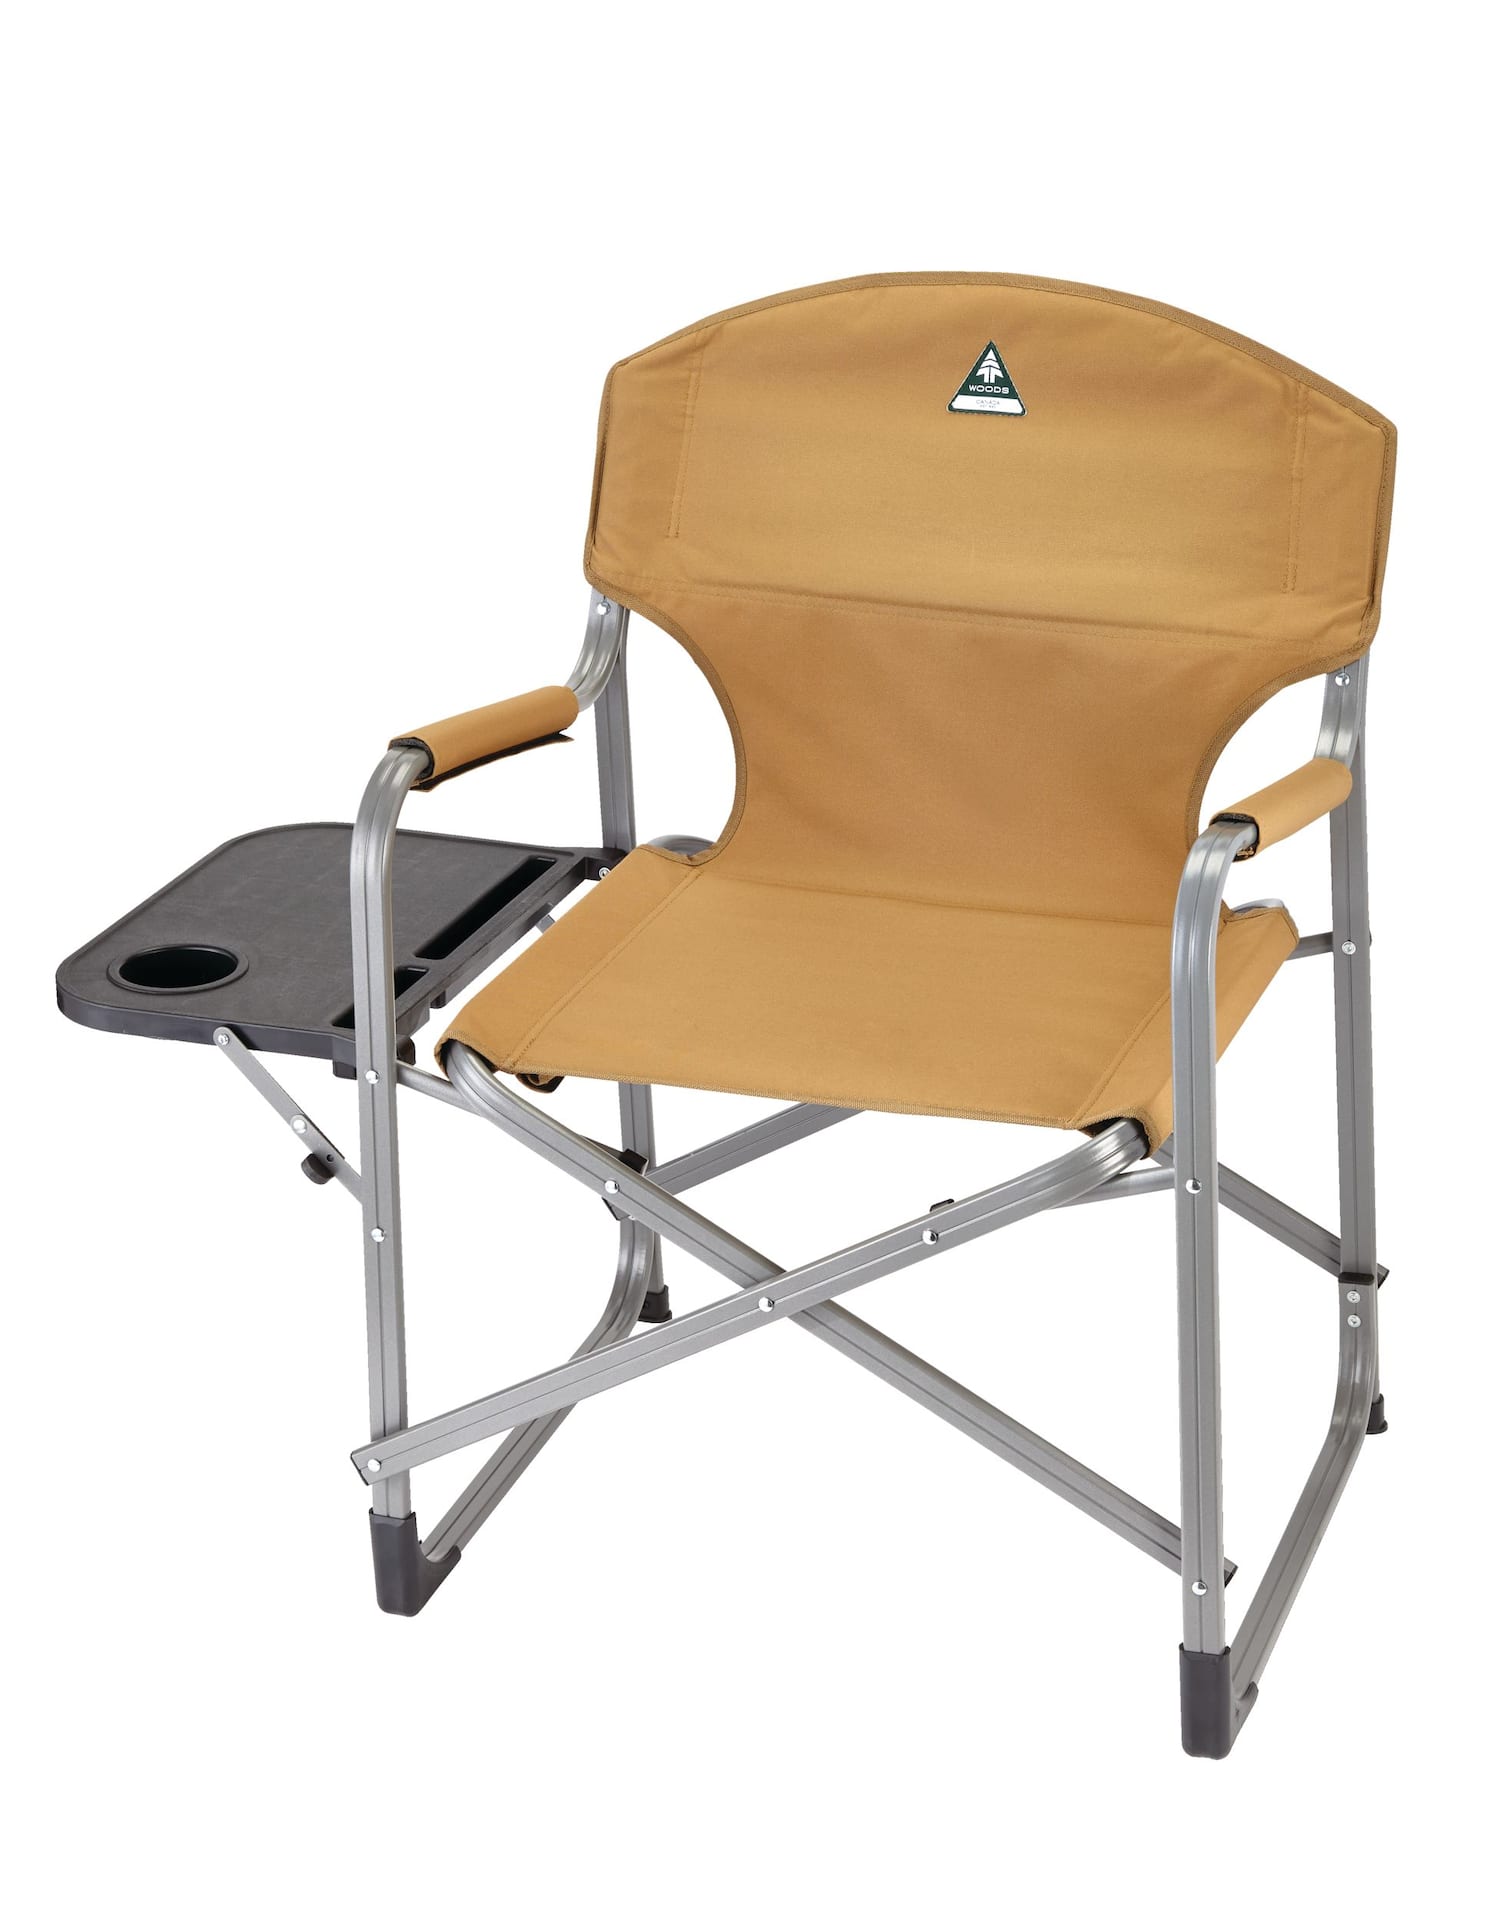 Woods Prospector Portable Folding Camping Chair w/ Side Table & Cup Holder